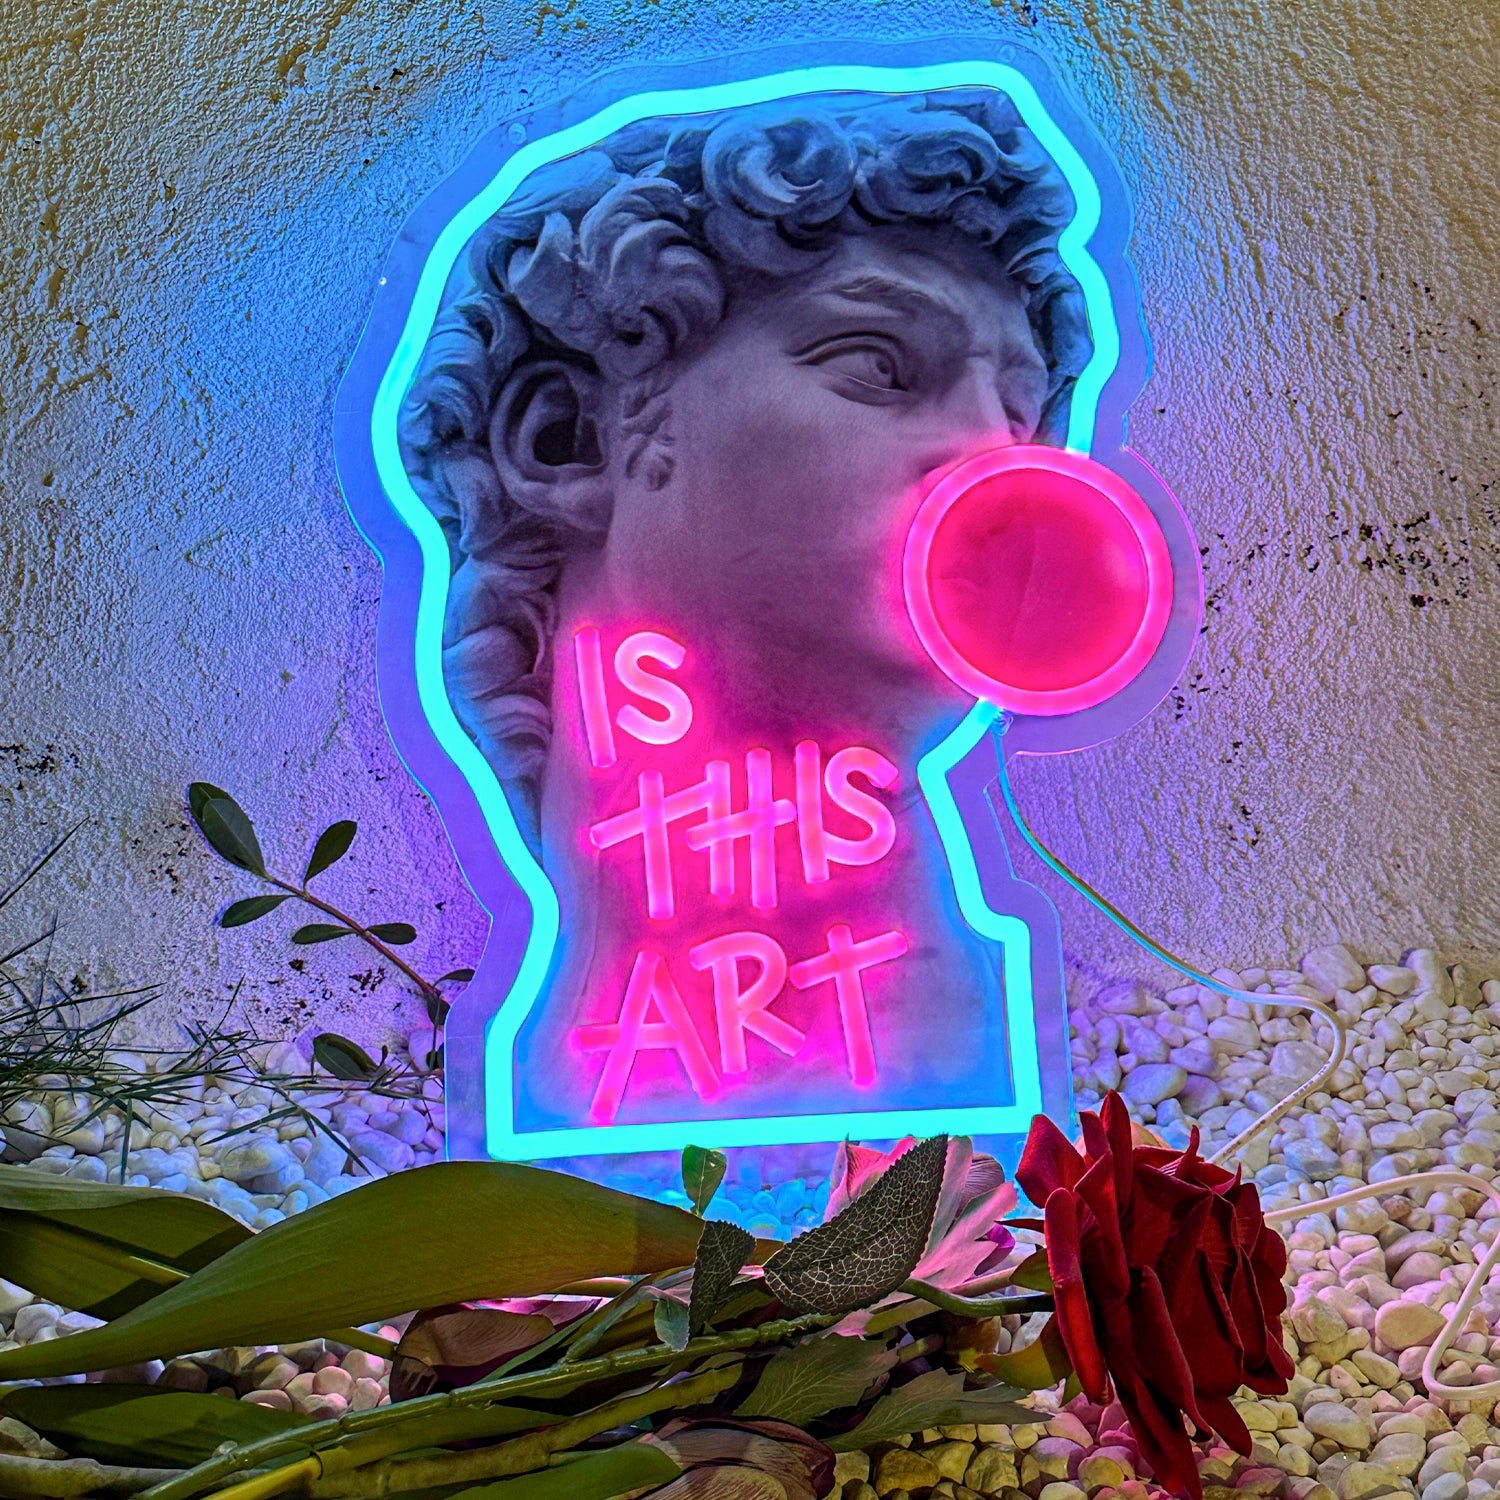 David Blowing Gum "IS THIS ART" Neon Light Wall Art - MAIA HOMES